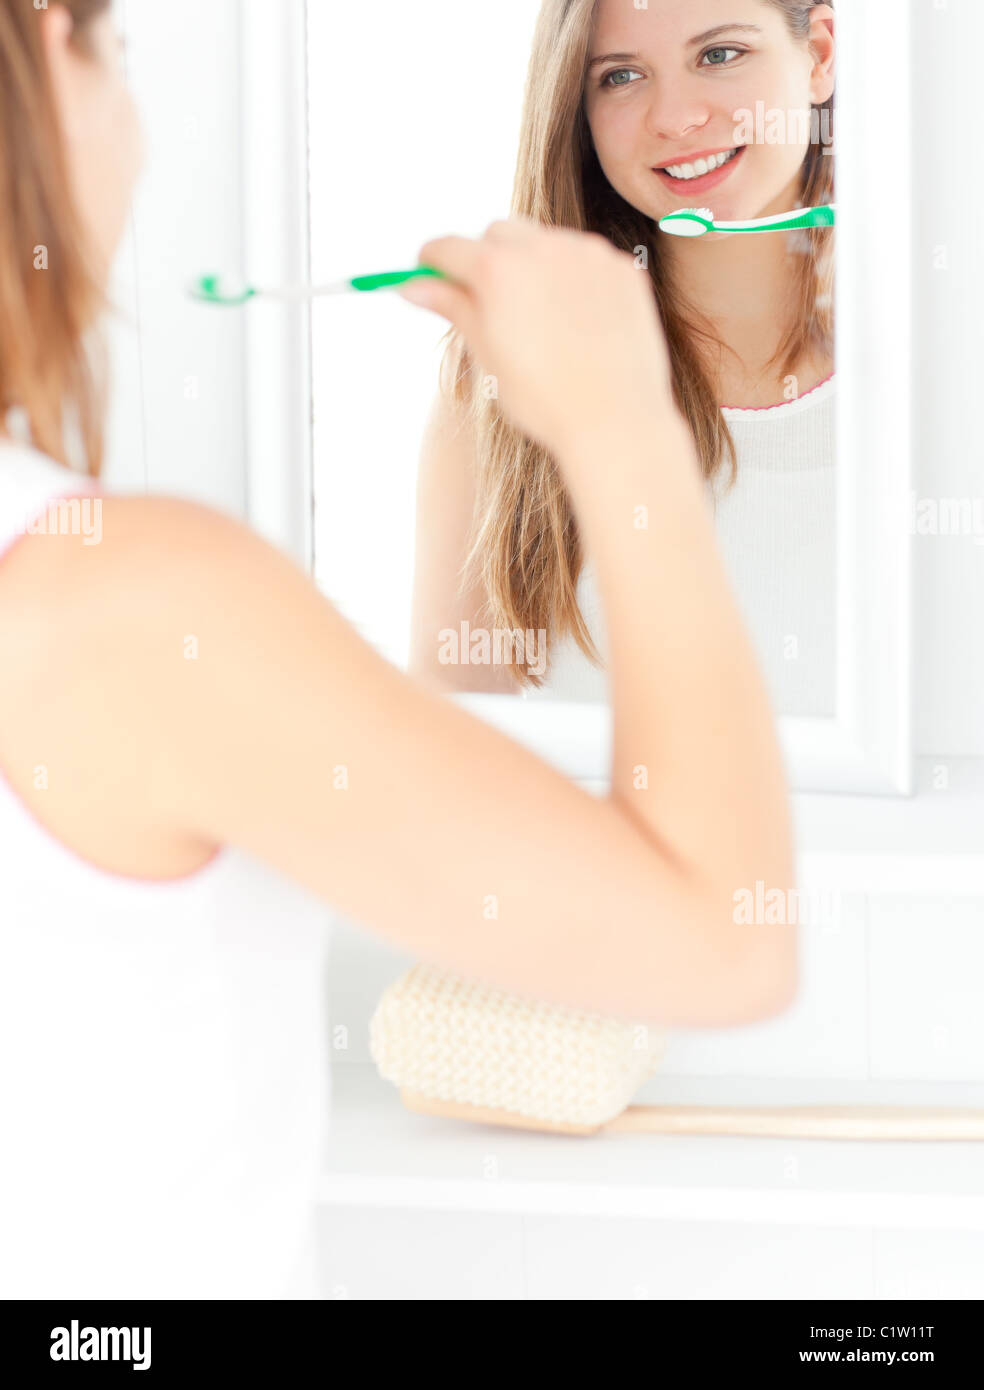 Captivating caucasian woman holding a toothbrush Stock Photo